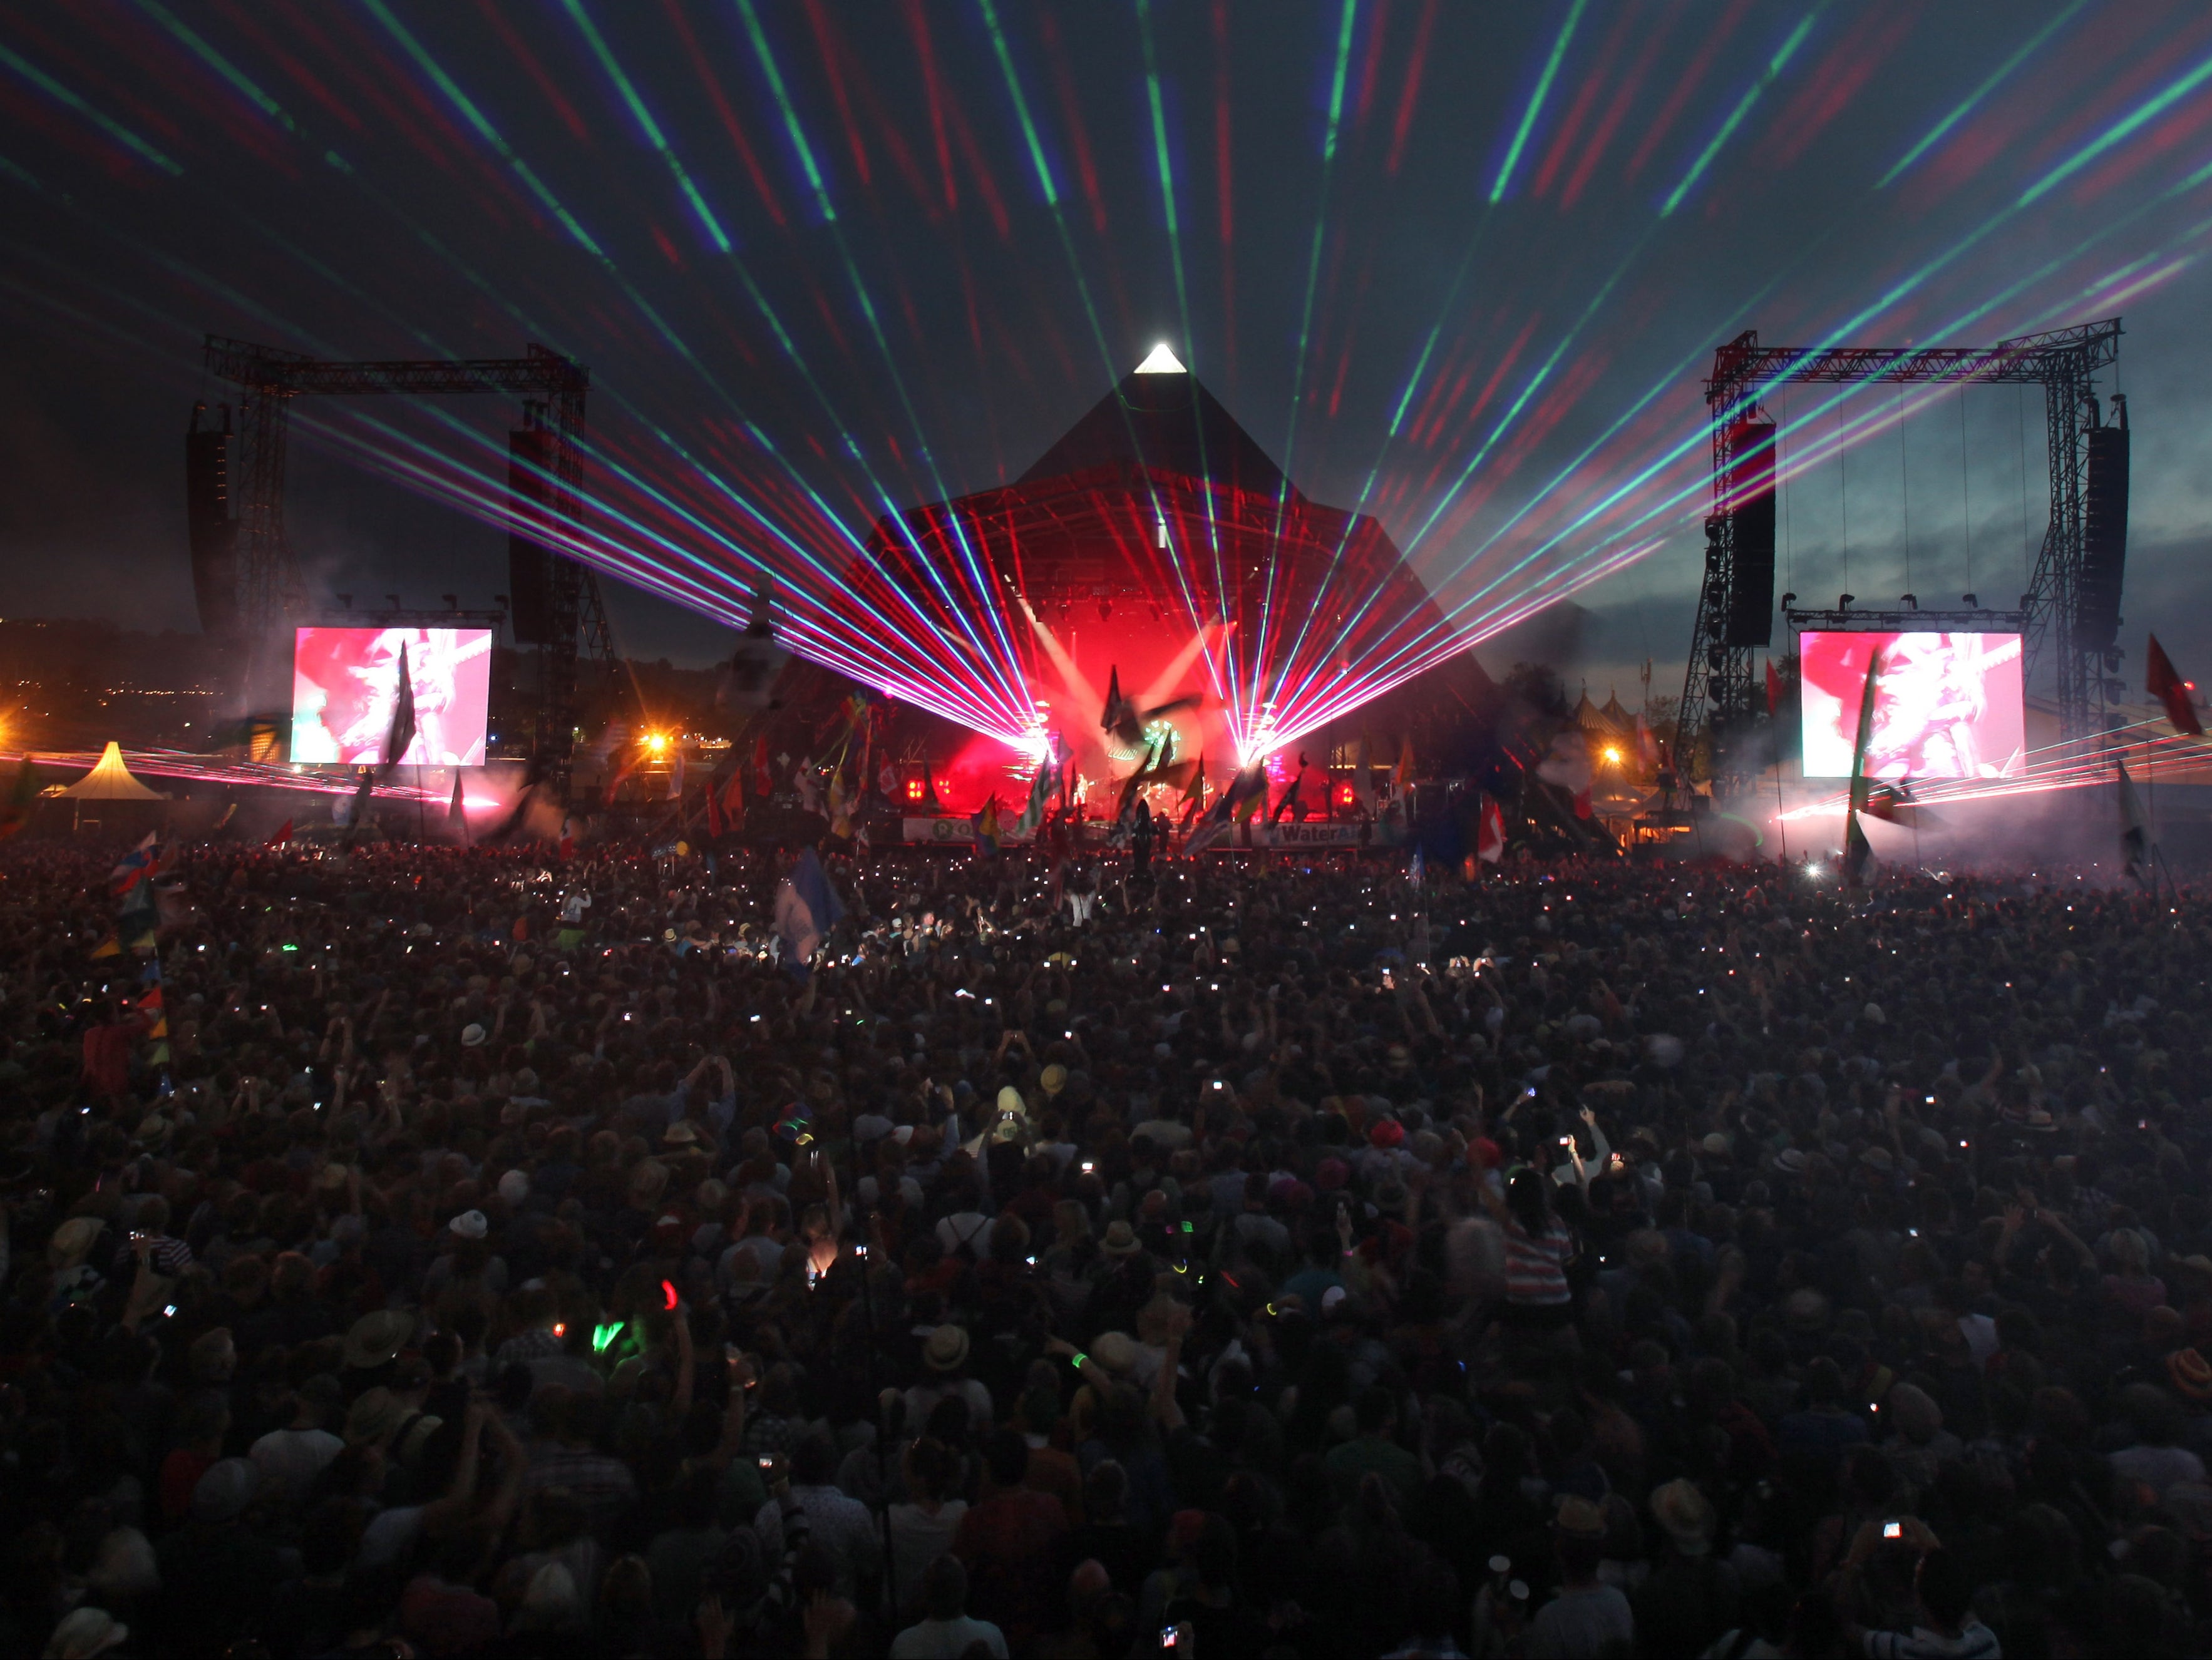 The Pyramid Stage was packed during Coldplay’s performance in 2011